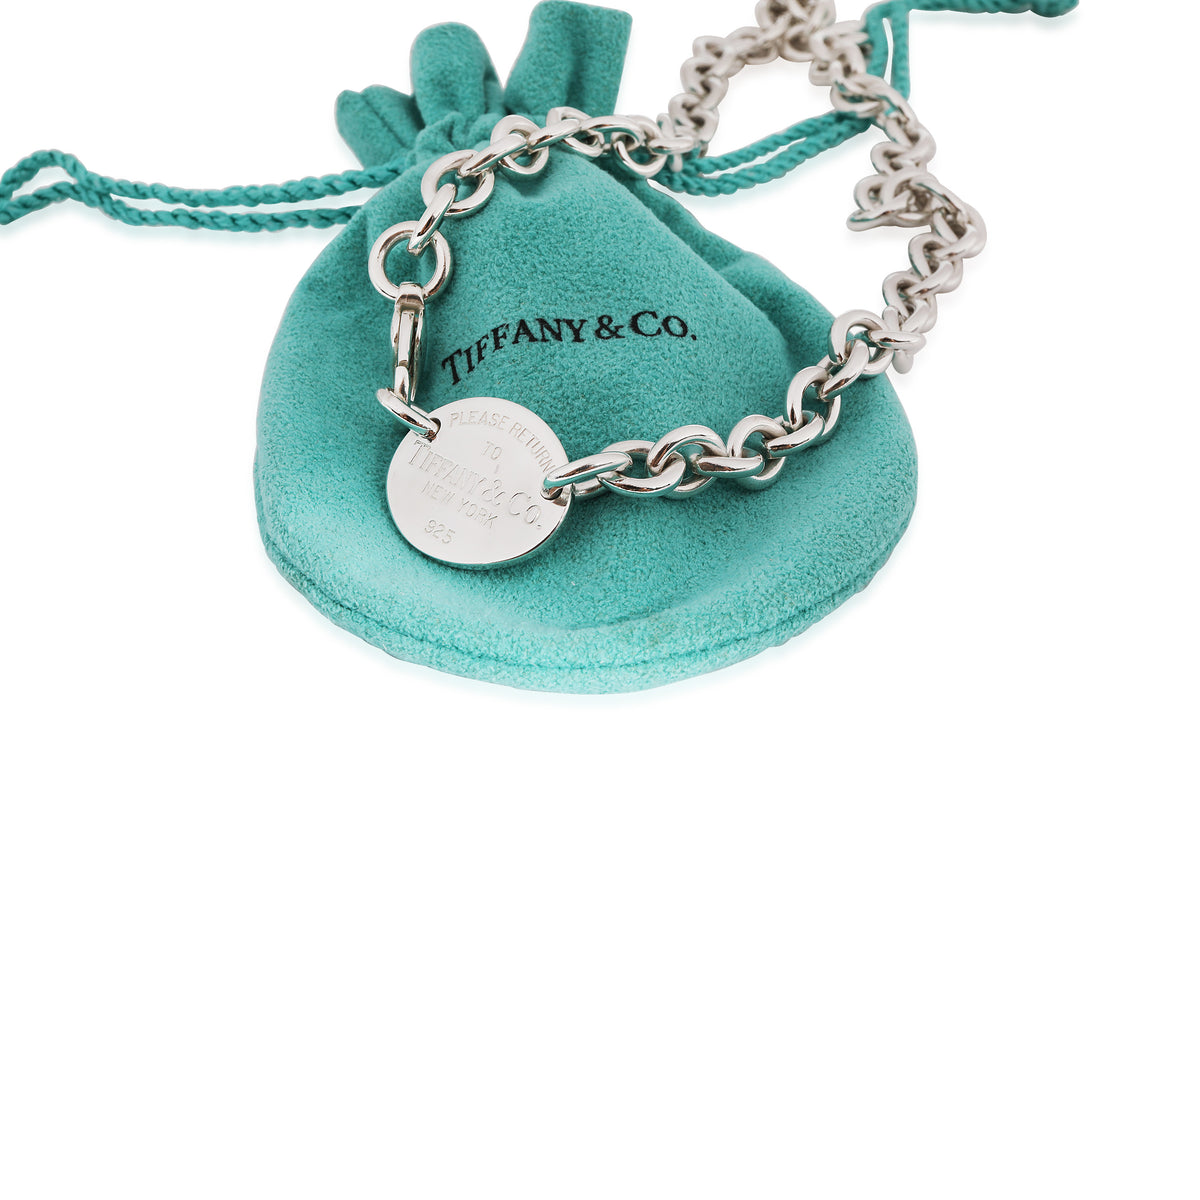 Tiffany & Co. Return To Tiffany Fashion Necklace in 925 Sterling Silver